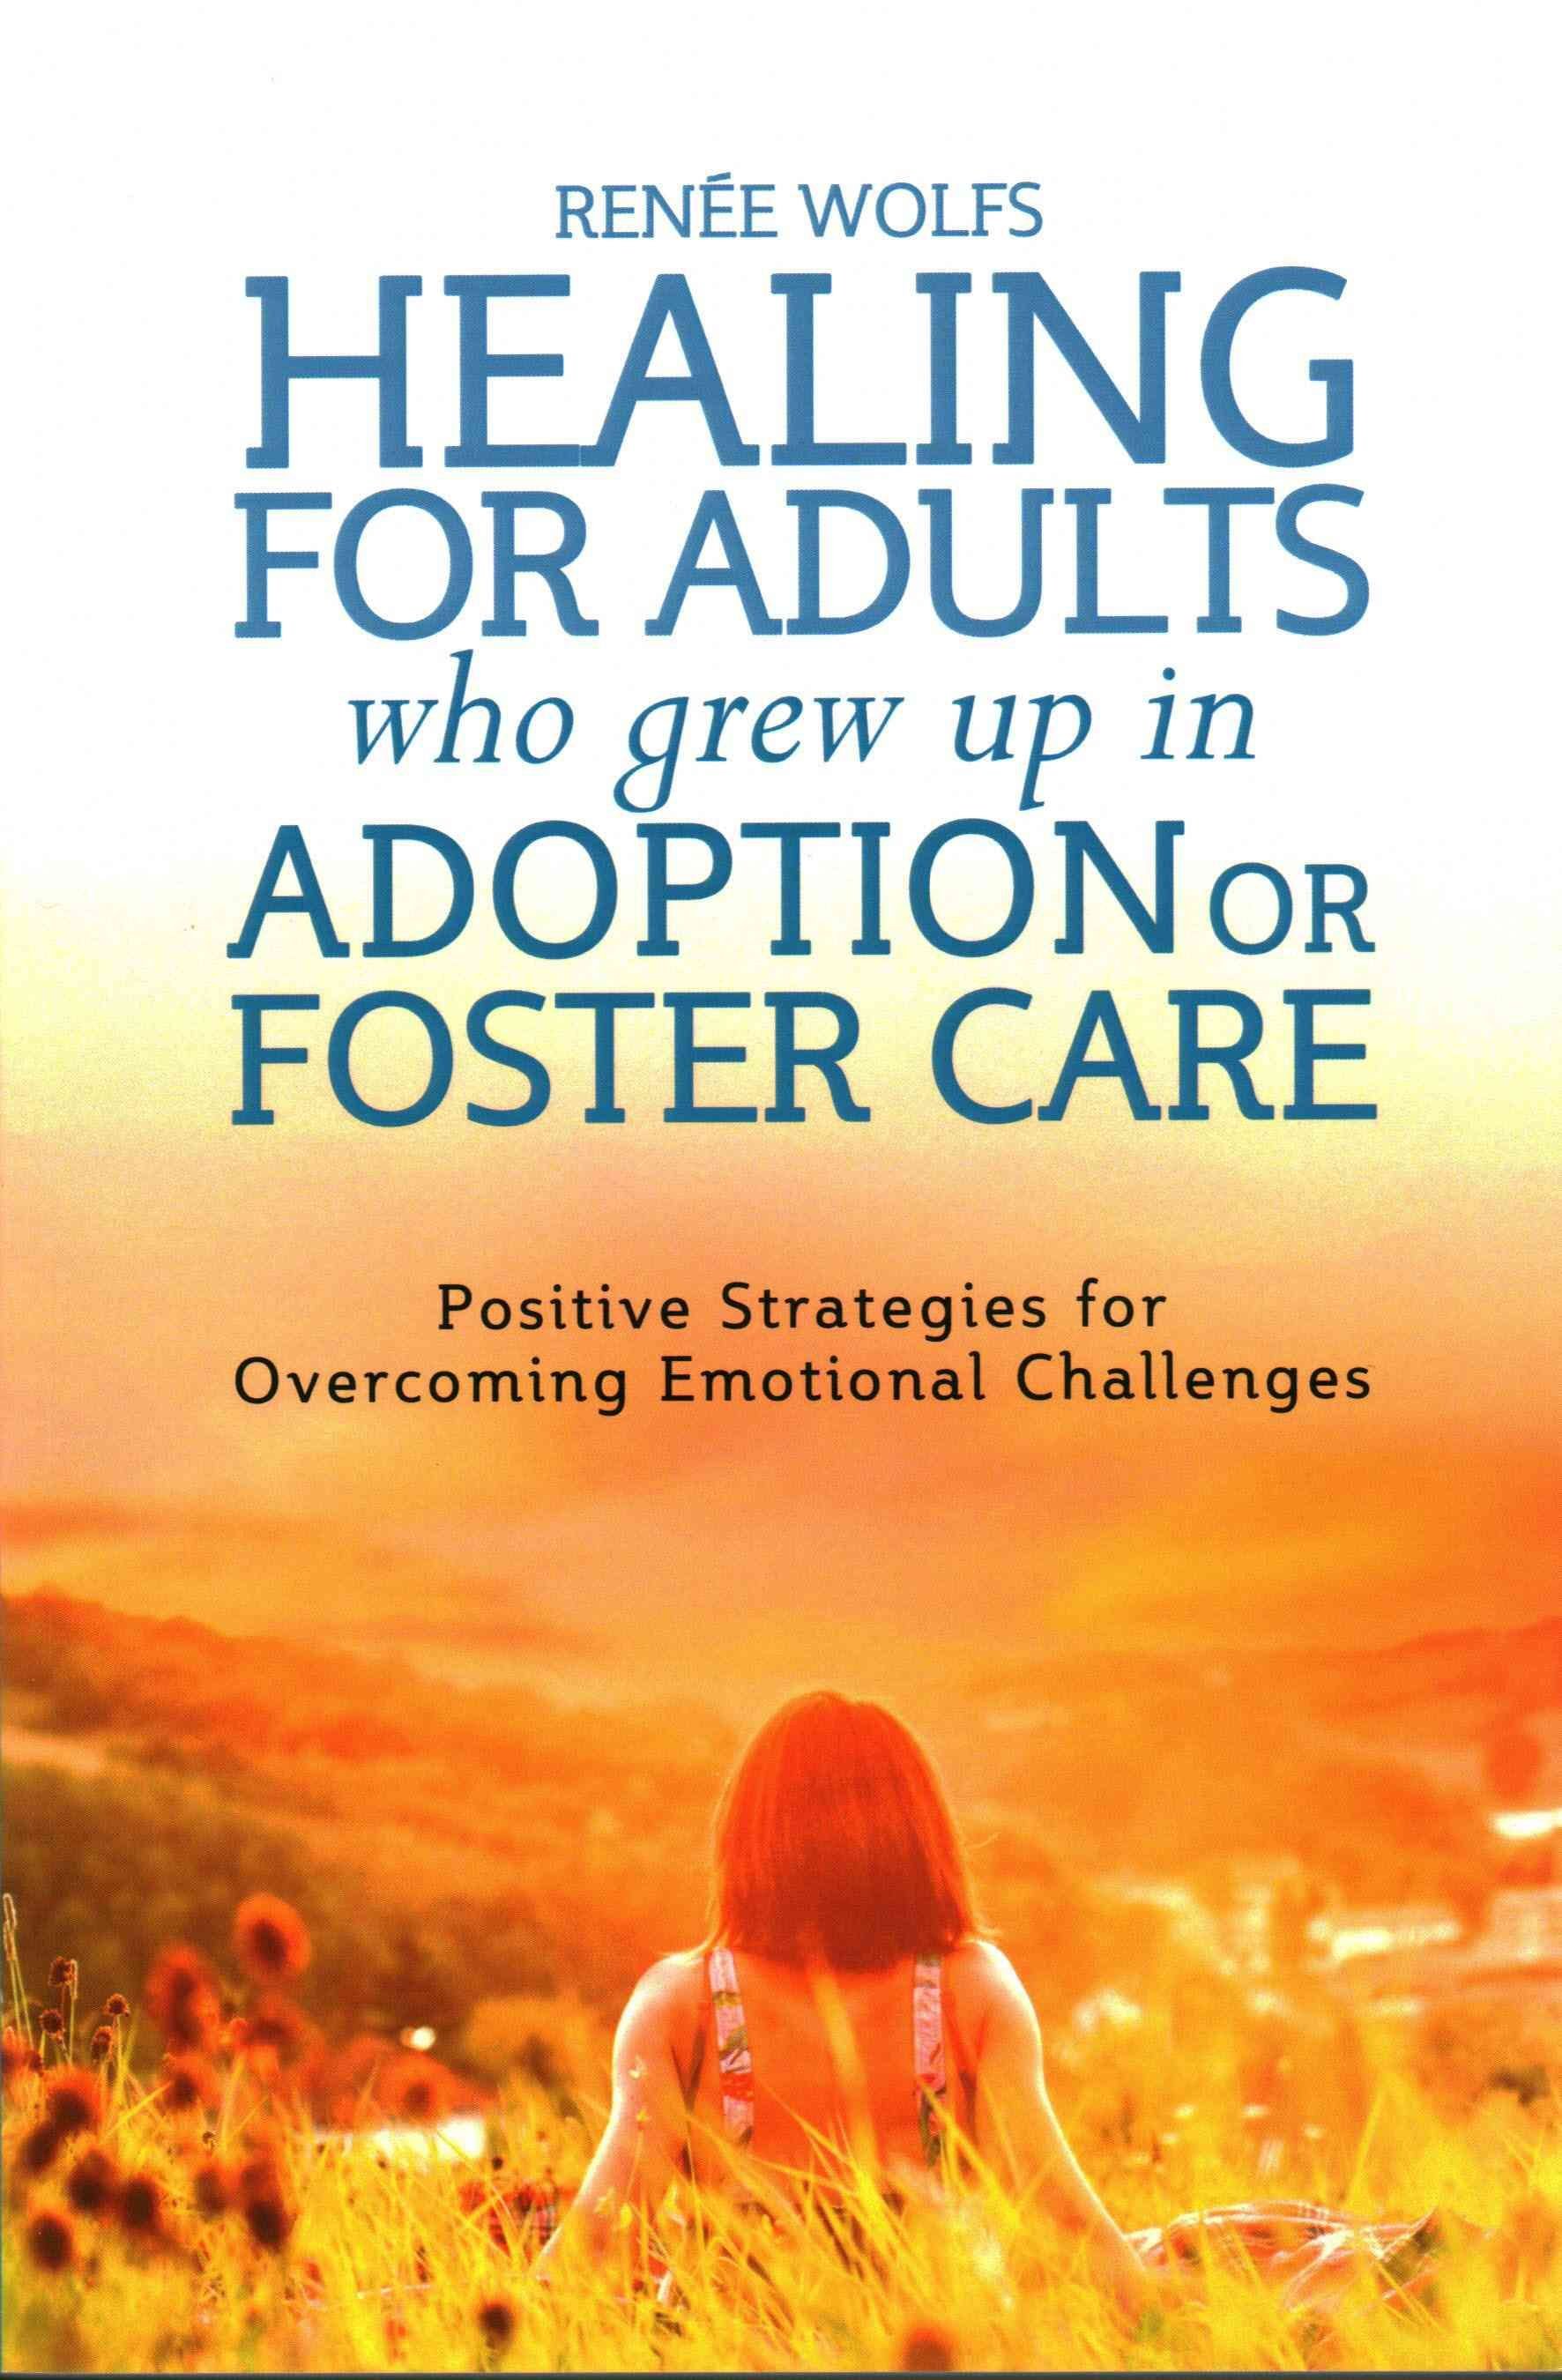 Healing for Adults Who Grew Up in Adoption or Foster Care